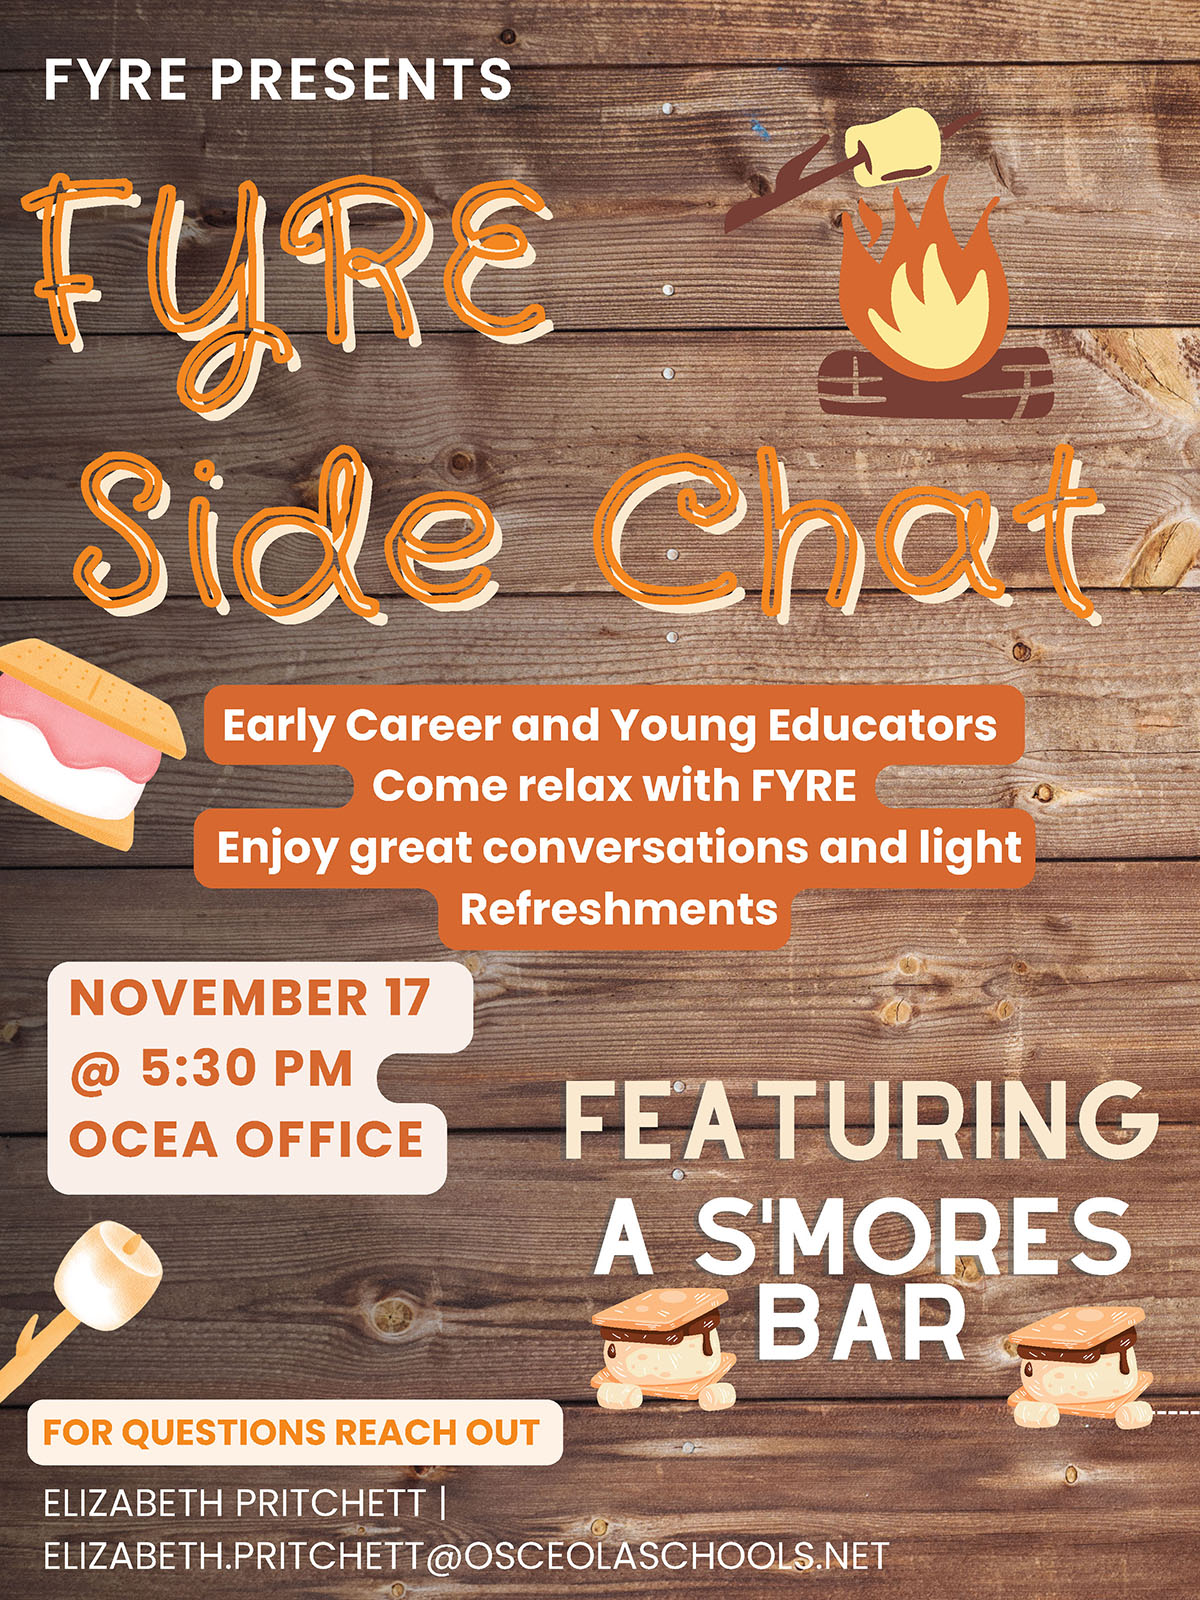 Join us November 17th for our FYRE side chat